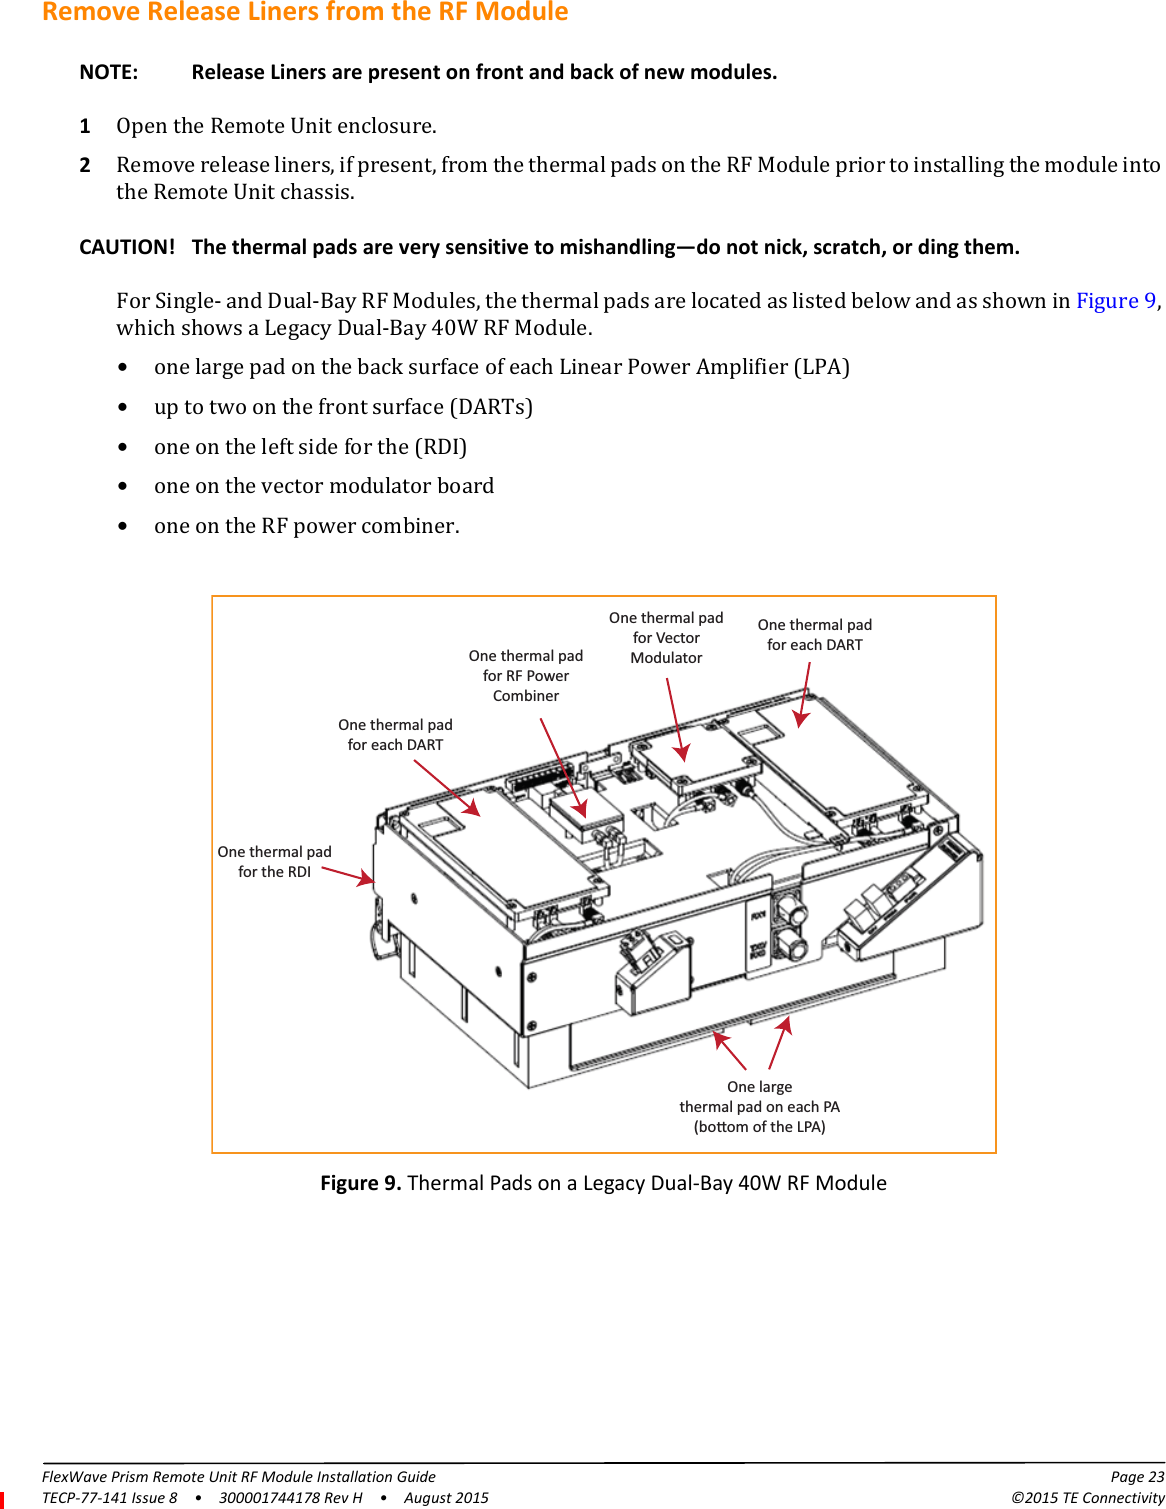 FlexWave Prism Remote Unit RF Module Installation Guide Page 23TECP-77-141 Issue 8  •  300001744178 Rev H  •  August 2015 ©2015 TE ConnectivityRemove Release Liners from the RF ModuleNOTE: Release Liners are present on front and back of new modules.1Open the Remote Unit enclosure.2Remove release liners, if present, from the thermal pads on the RF Module prior to installing the module into the Remote Unit chassis.CAUTION! The thermal pads are very sensitive to mishandling—do not nick, scratch, or ding them.For Single- and Dual-Bay RF Modules, the thermal pads are located as listed below and as shown in Figure 9, which shows a Legacy Dual-Bay 40W RF Module.•one large pad on the back surface of each Linear Power Amplifier (LPA)•up to two on the front surface (DARTs)•one on the left side for the (RDI)•one on the vector modulator boardOne largethermal pad on each PA(boom of the LPA)One thermal padfor the RDIOne thermal padfor each DARTOne thermal padfor each DARTOne thermal padfor RF PowerCombinerOne thermal padfor VectorModulator•one on the RF power combiner.Figure 9. Thermal Pads on a Legacy Dual-Bay 40W RF Module